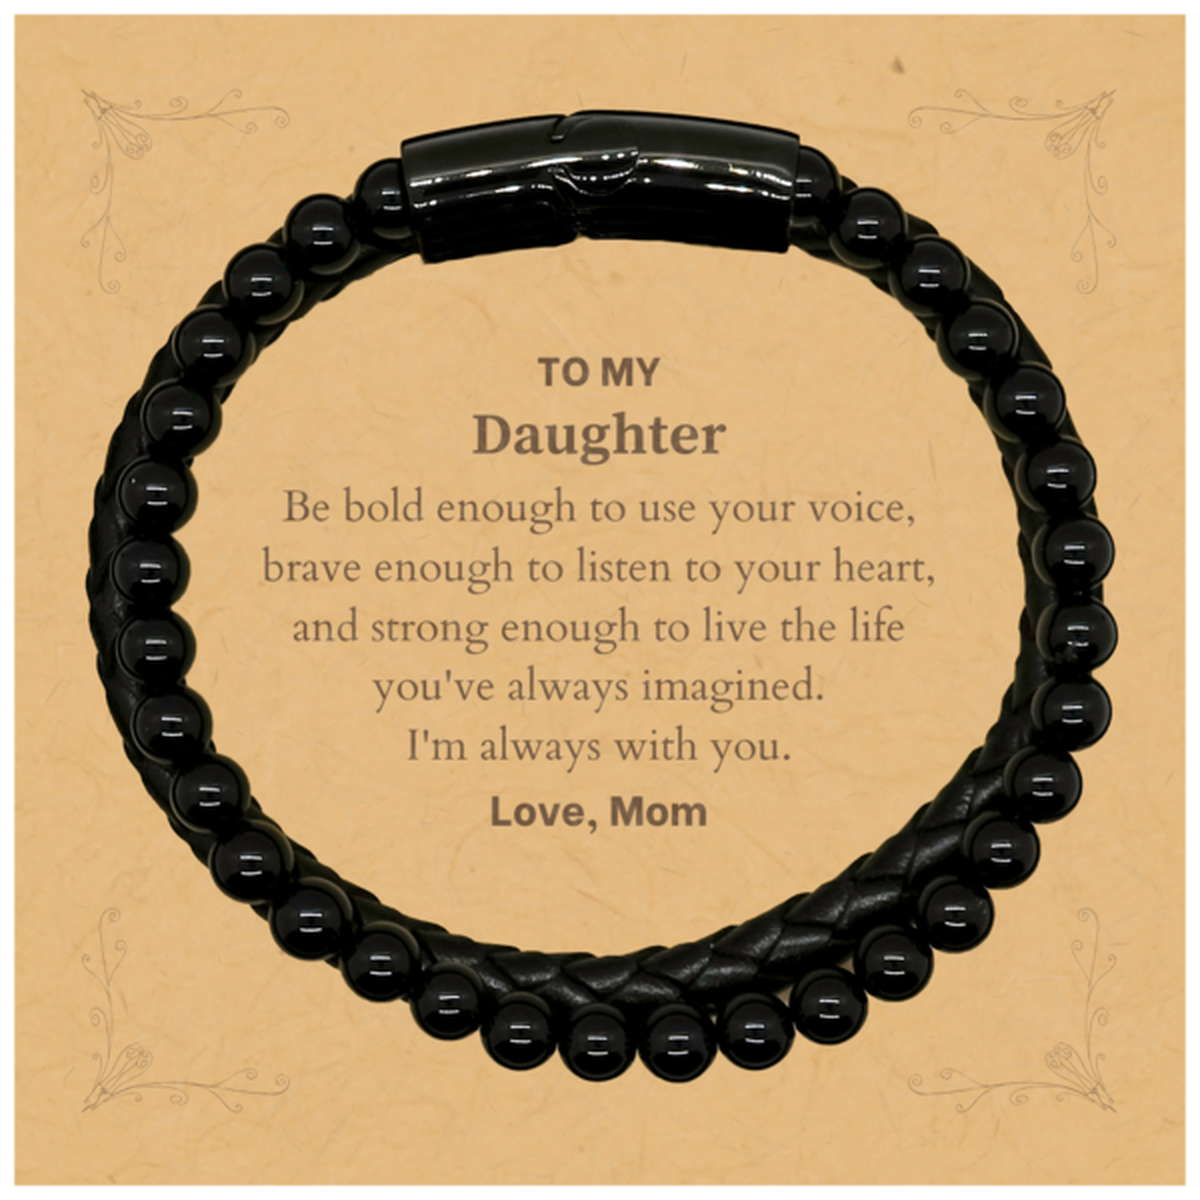 Keepsake Daughter Stone Leather Bracelets Gift Idea Graduation Christmas Birthday Daughter from Mom, Daughter Be bold enough to use your voice, brave enough to listen to your heart. Love, Mom